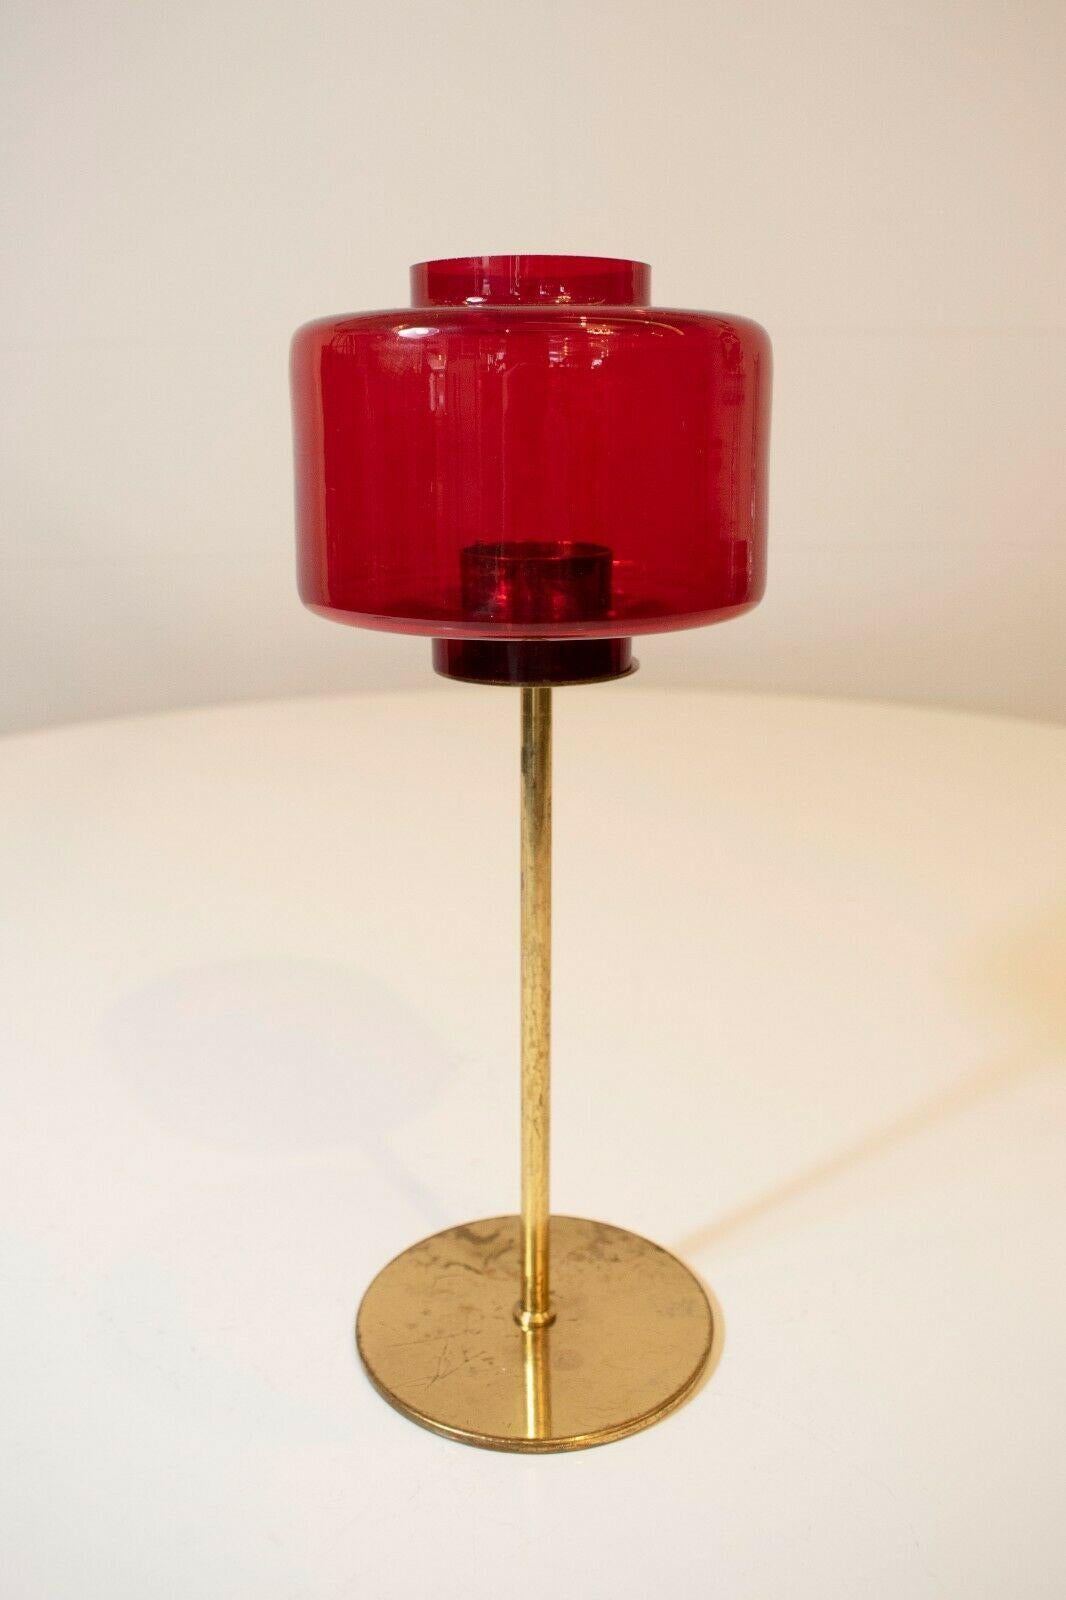 This rare and collectable candleholder was made in Sweden, 1960's and designed by Hans-agne Jakobsson. 

A square red top set upon an elegant brass base, this piece sports its original and authentic patina. It shows signs of usage expected with it's